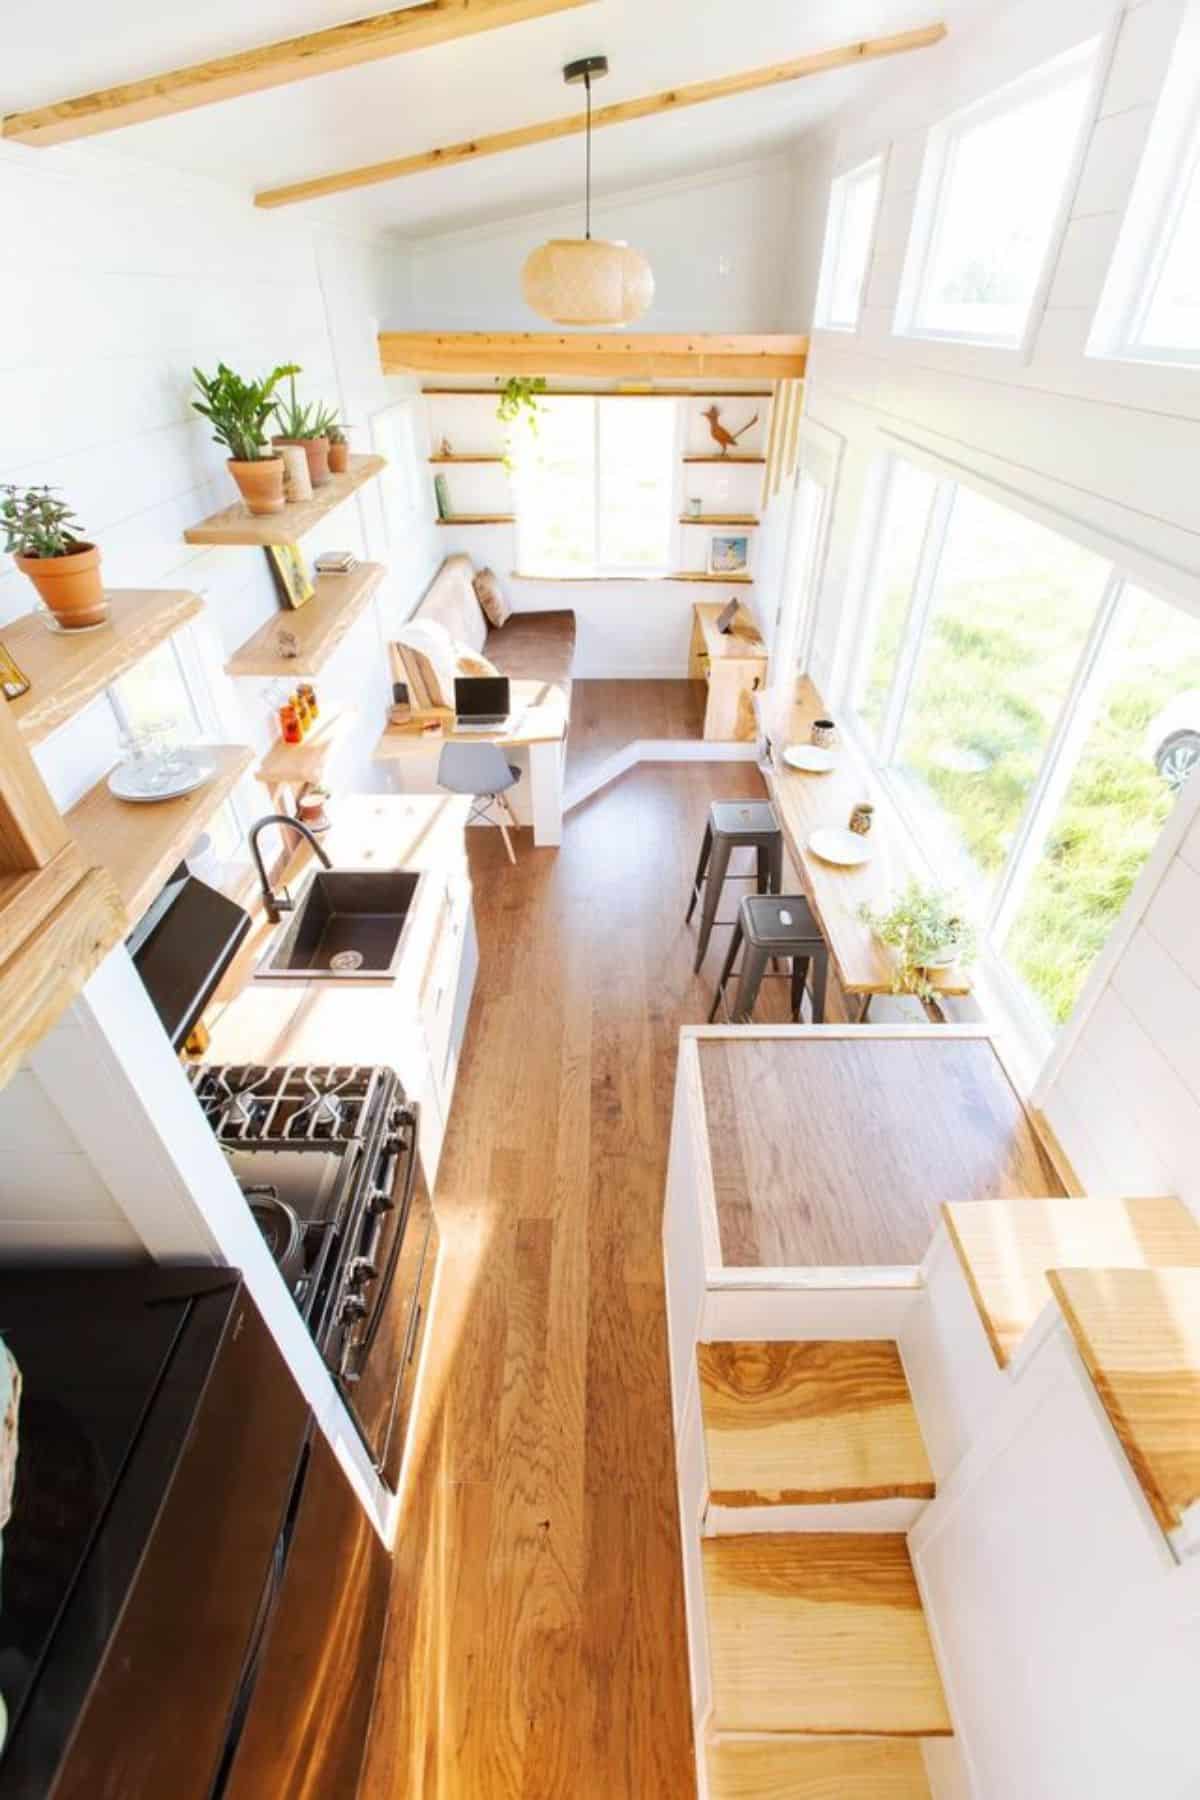 Ariel view of one bedroom tiny home from inside